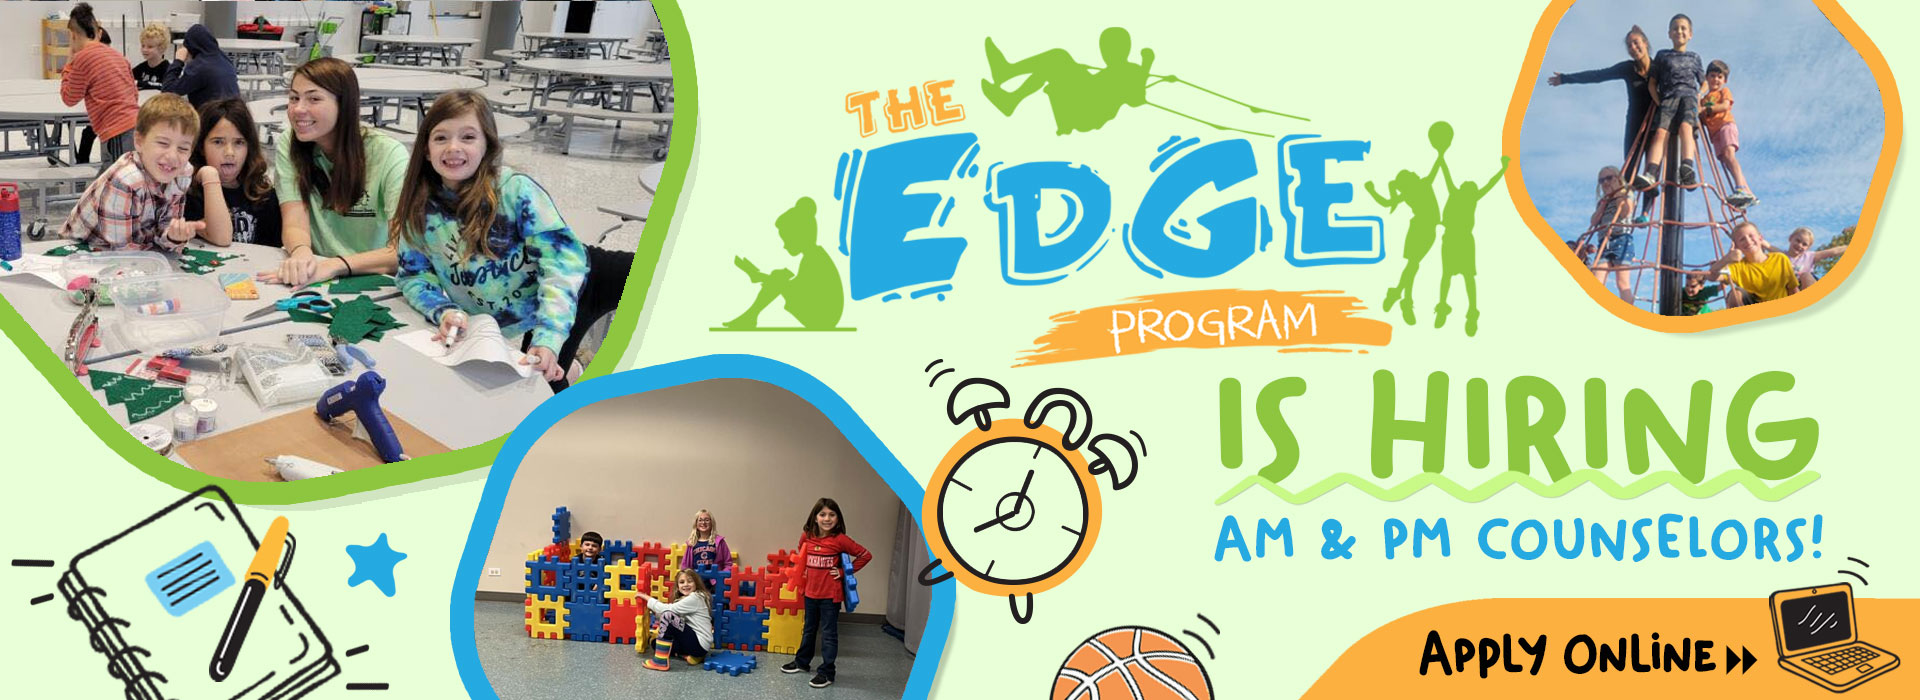 The EDGE Program is hiring AM & PM Counselors